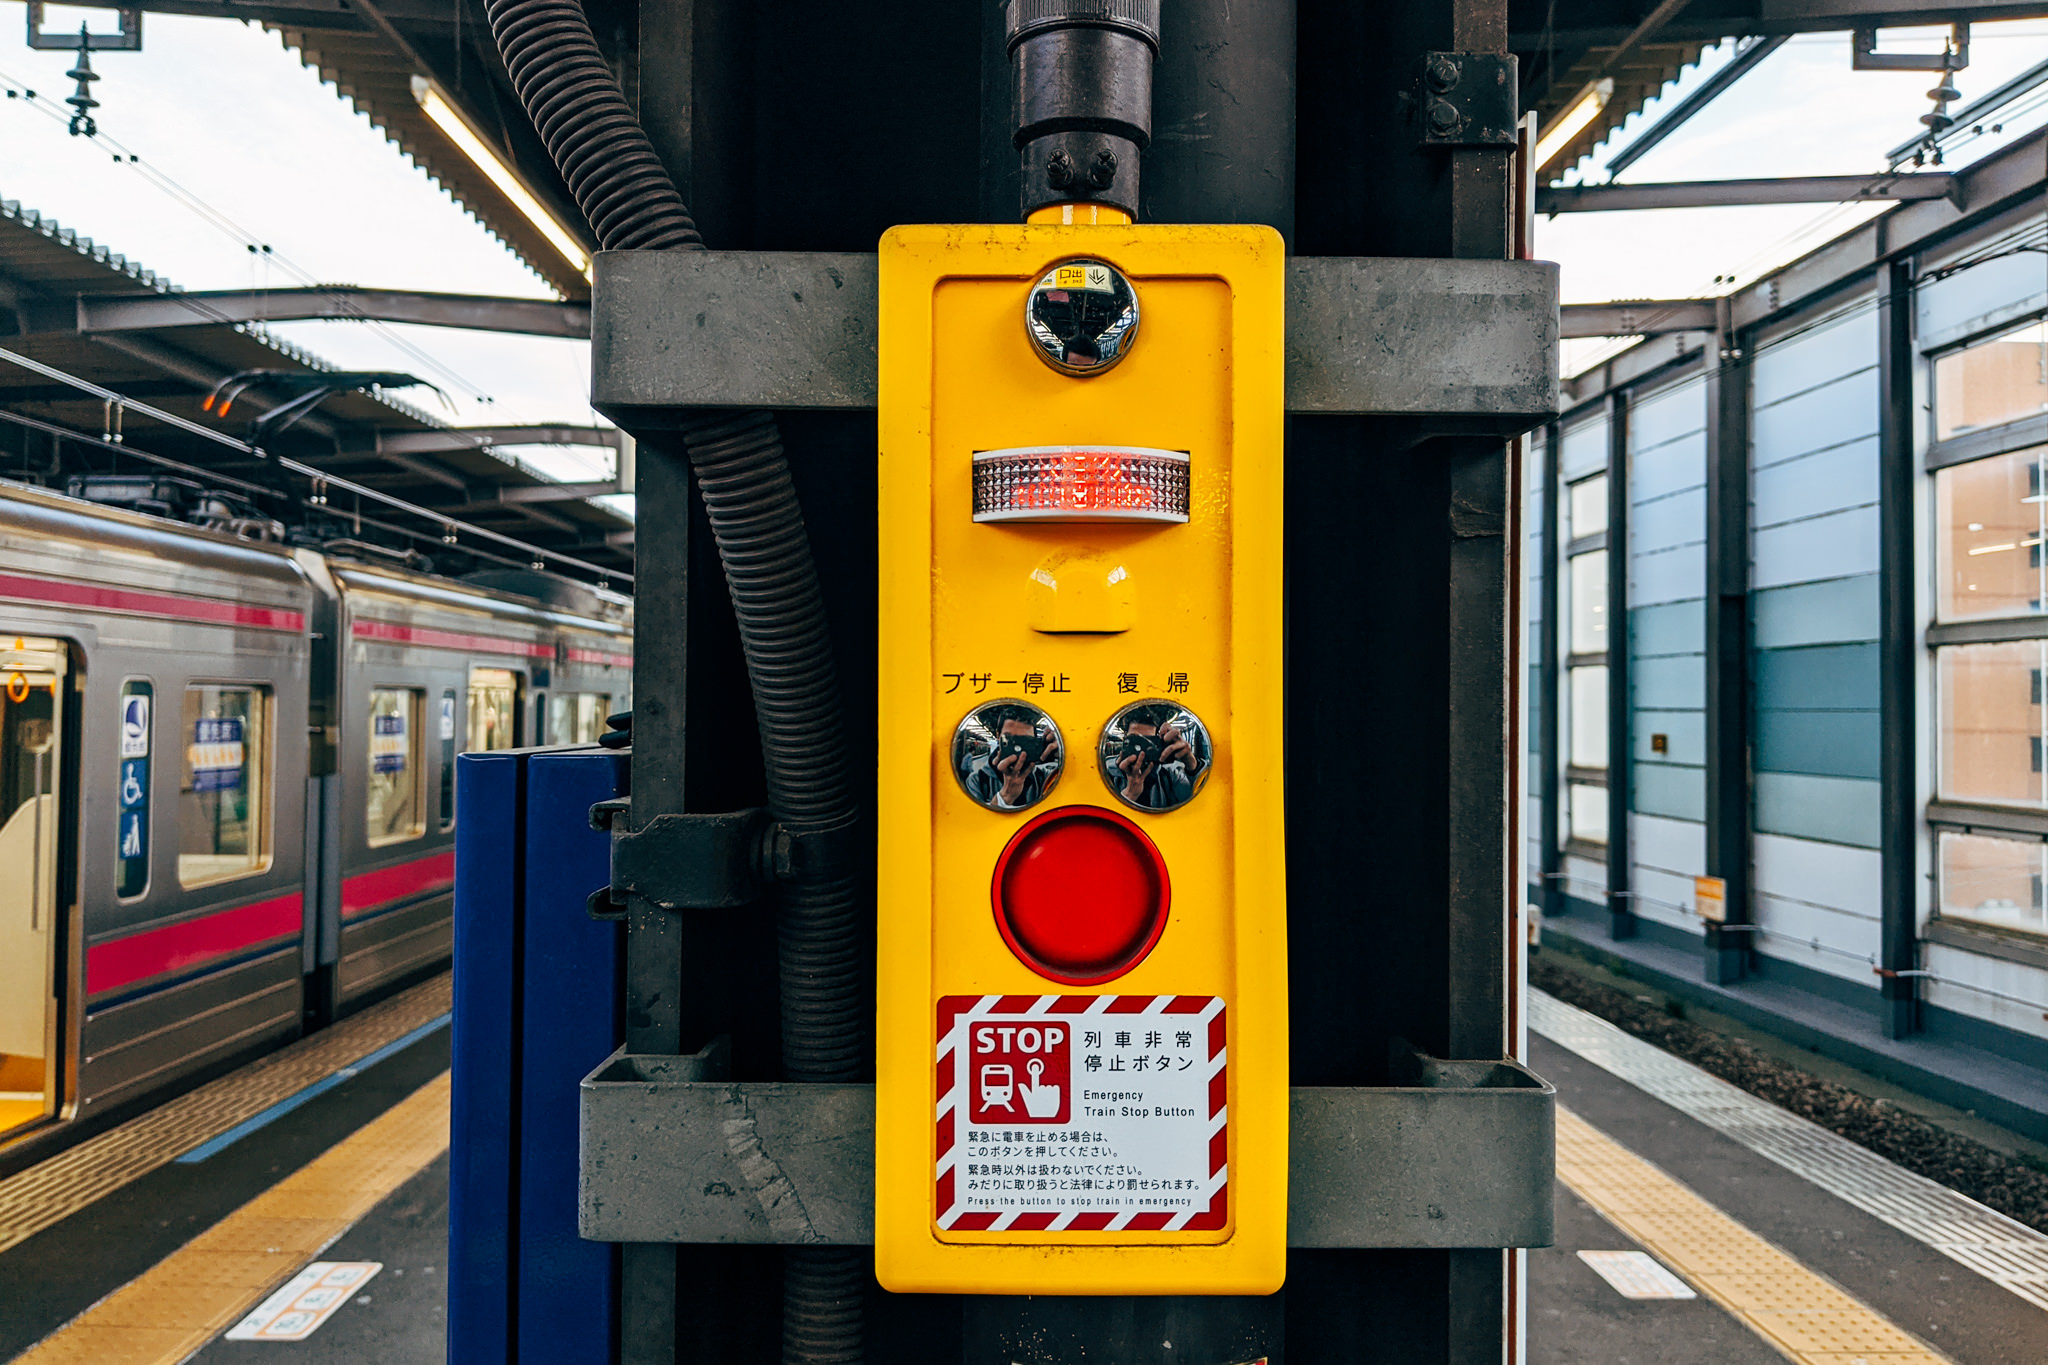 alarm-button-red-yellow-emergency